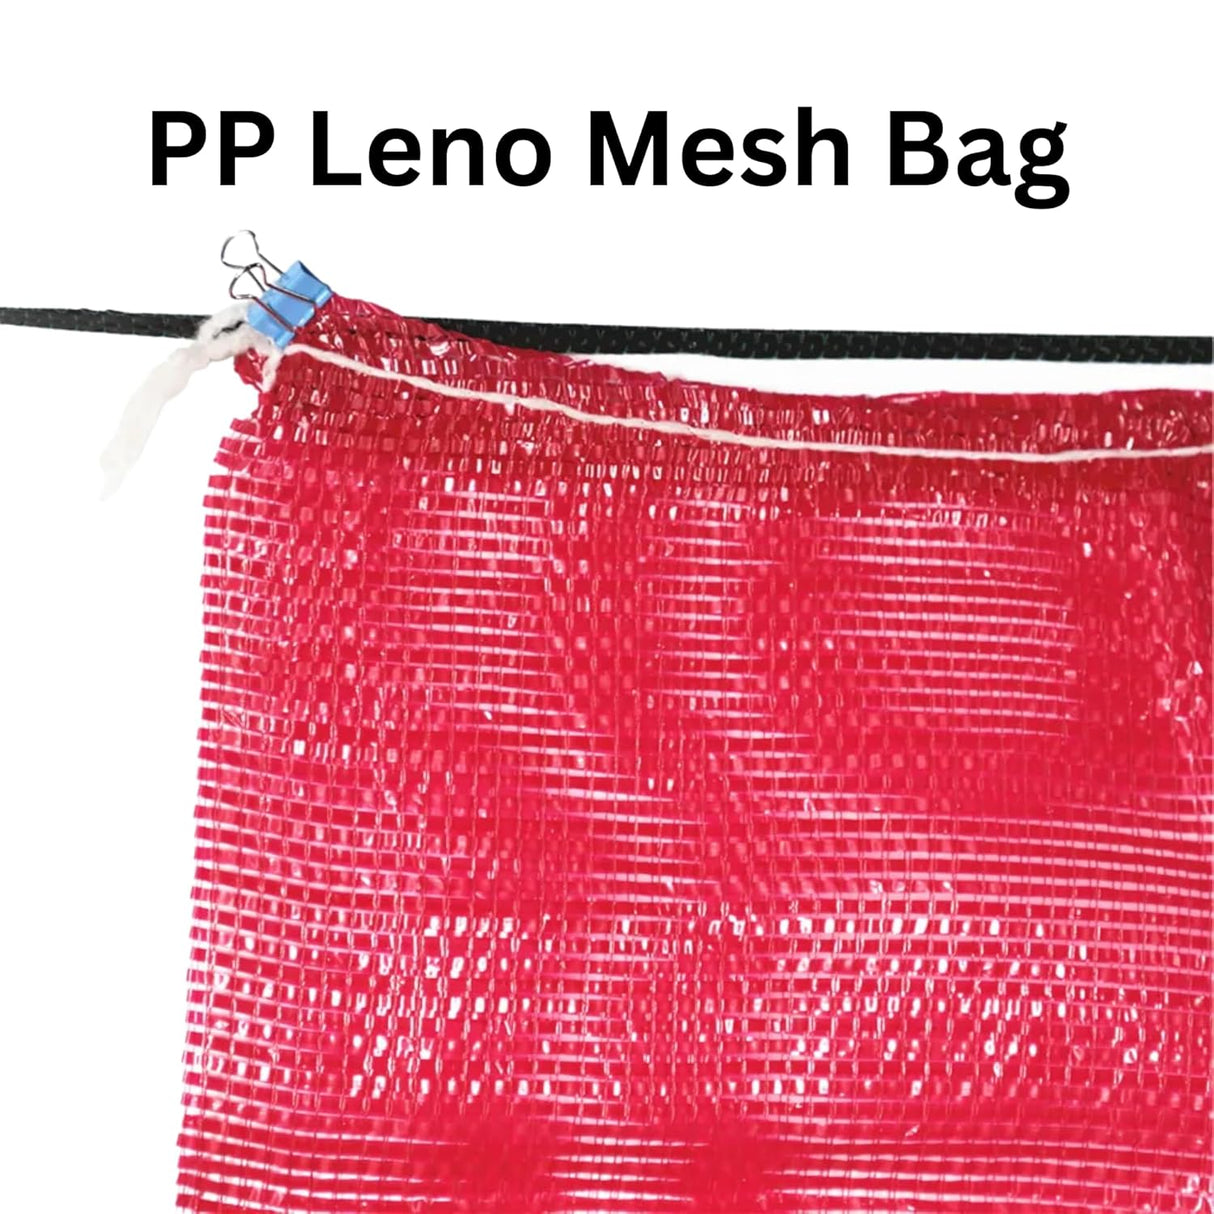 SINGHAL Leno Mesh Storage Produce Bags Reusable for Vegetable Storage Bags Onion Storage Washable Net Bags (18x20 Inch - White, 50)